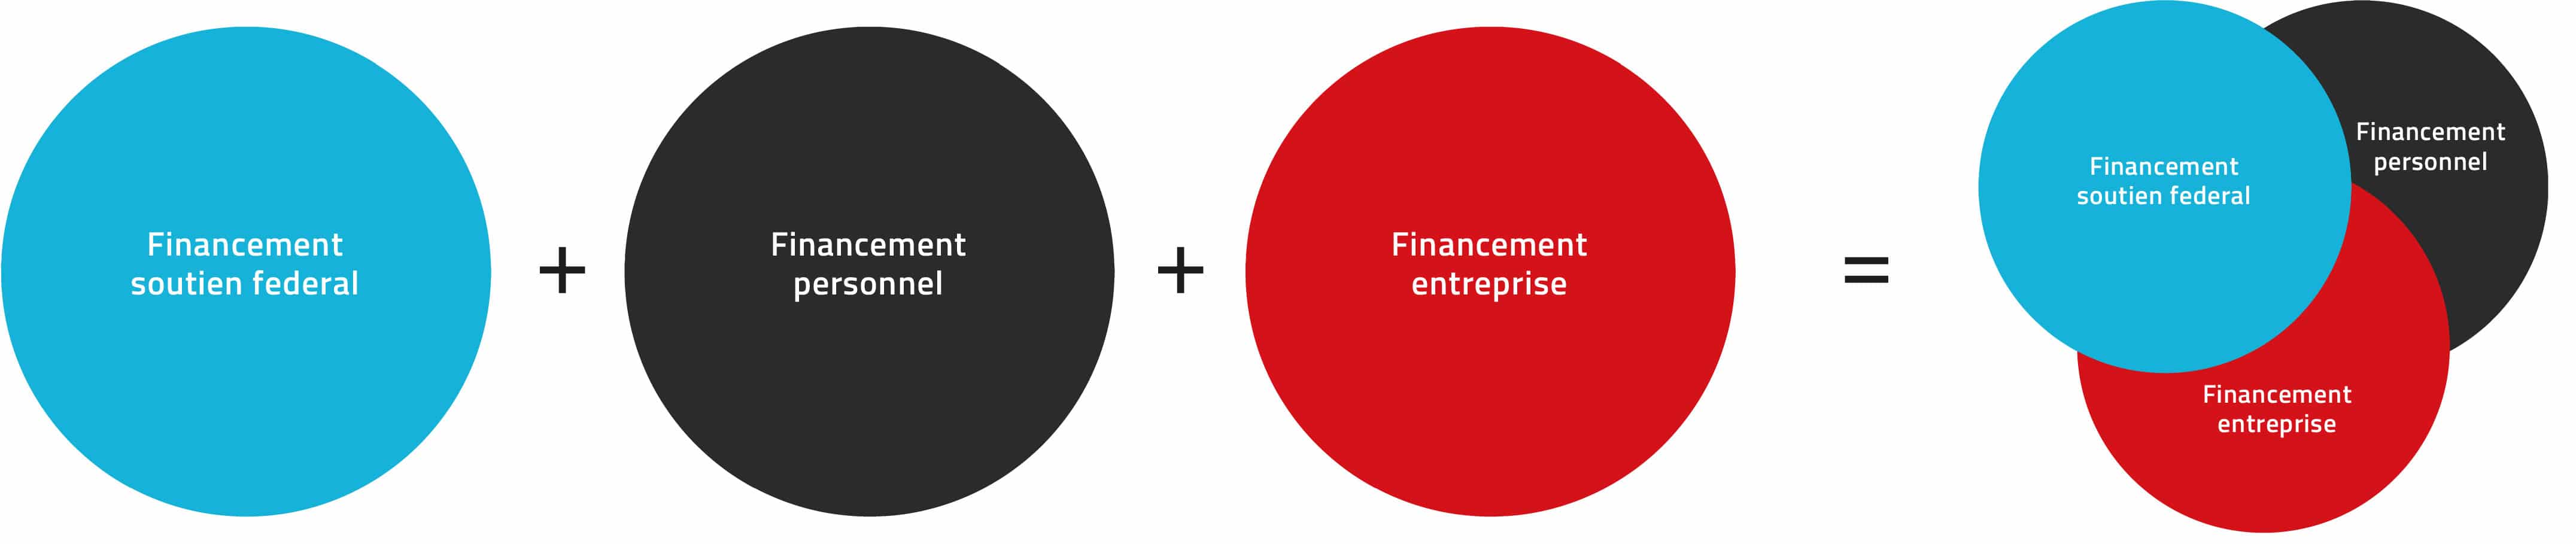 Diagramme financement formation